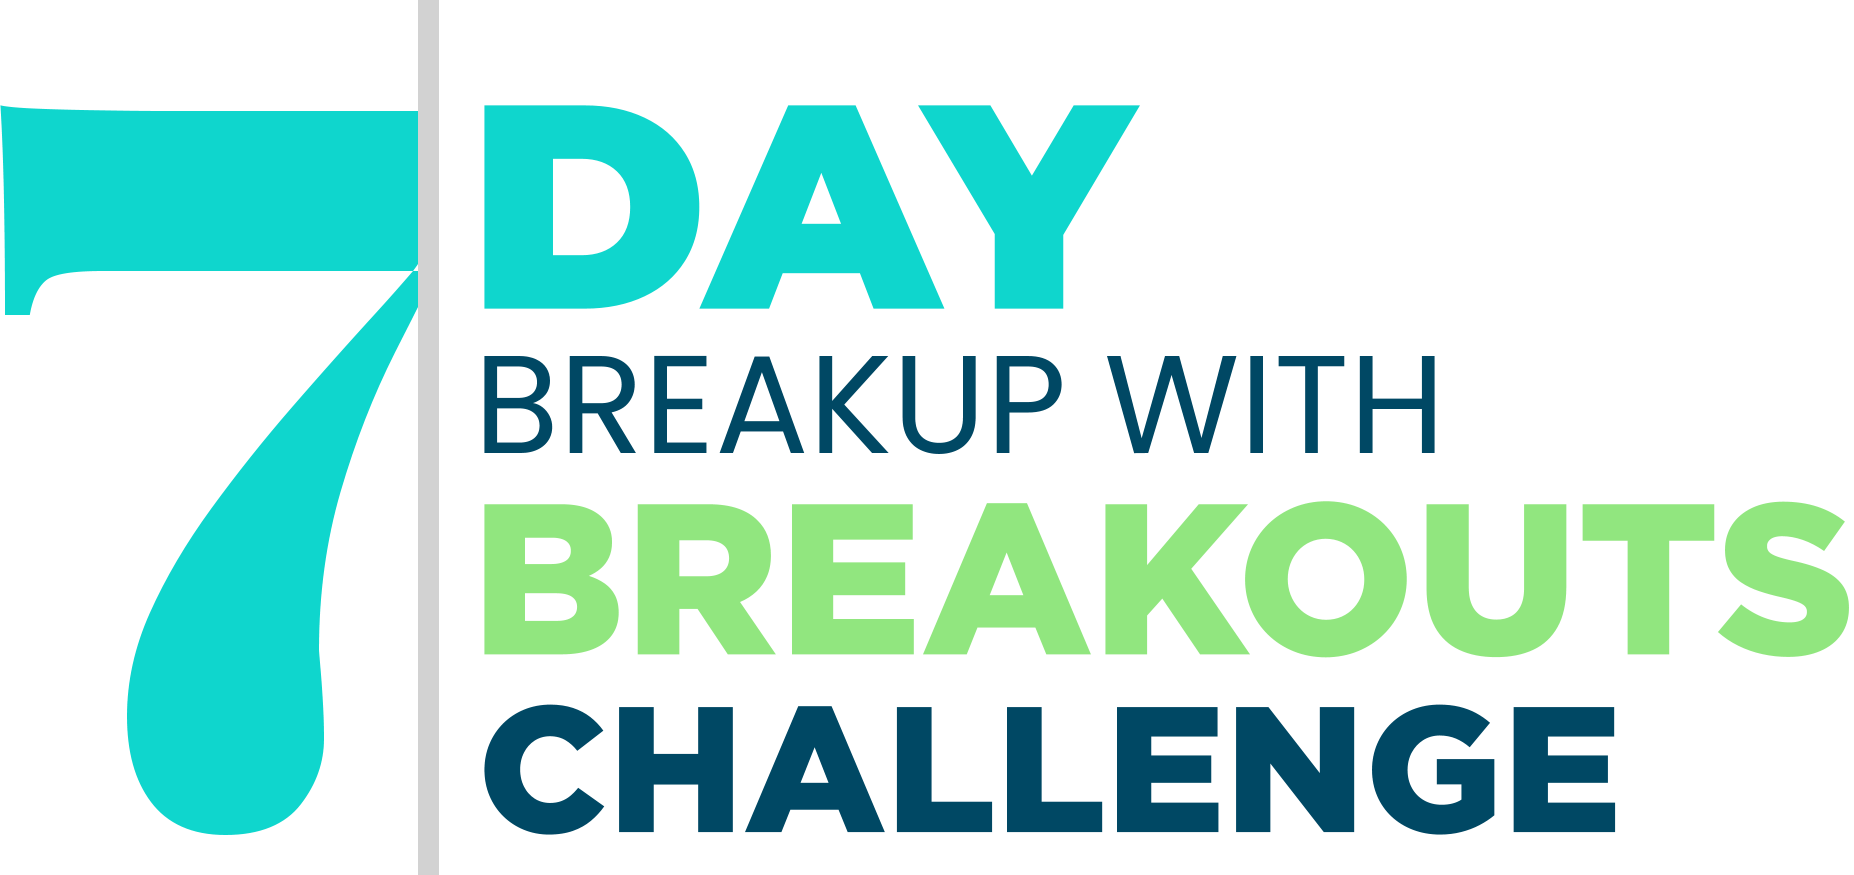 7 Day Breakup With Breakouts Challenge